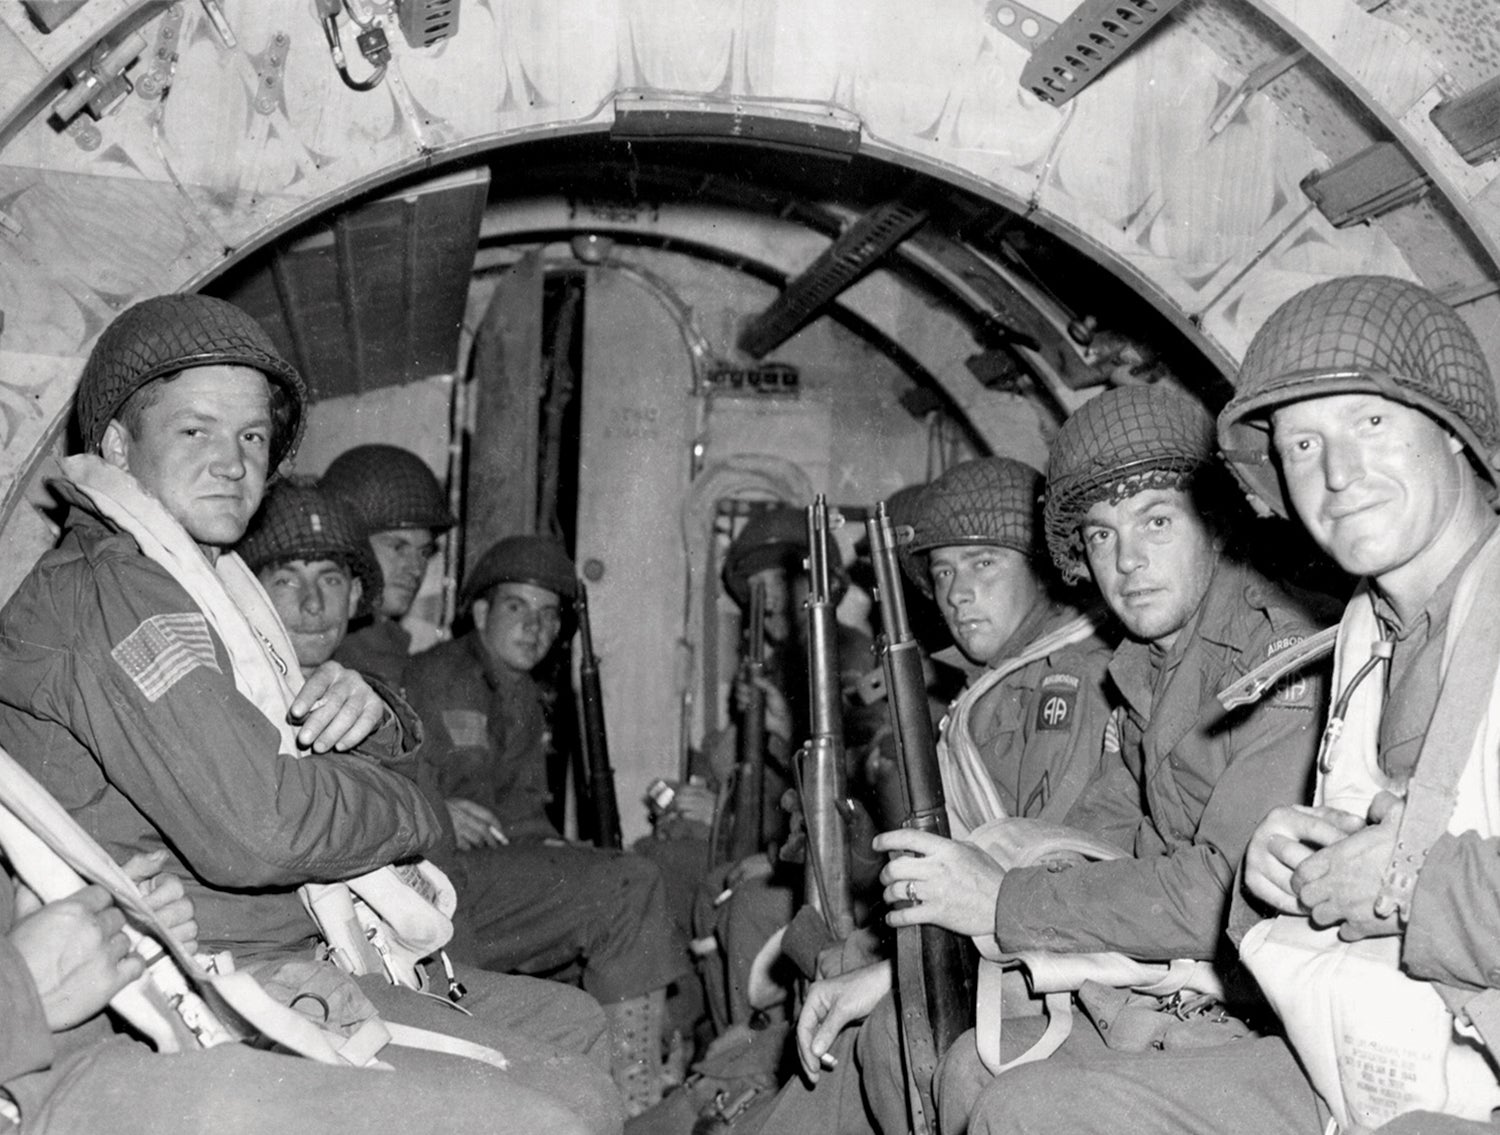 Left: Paratroopers aboard a C-47 transport plane on D-Day. (Credit: National Archives/U.S. Air Force)